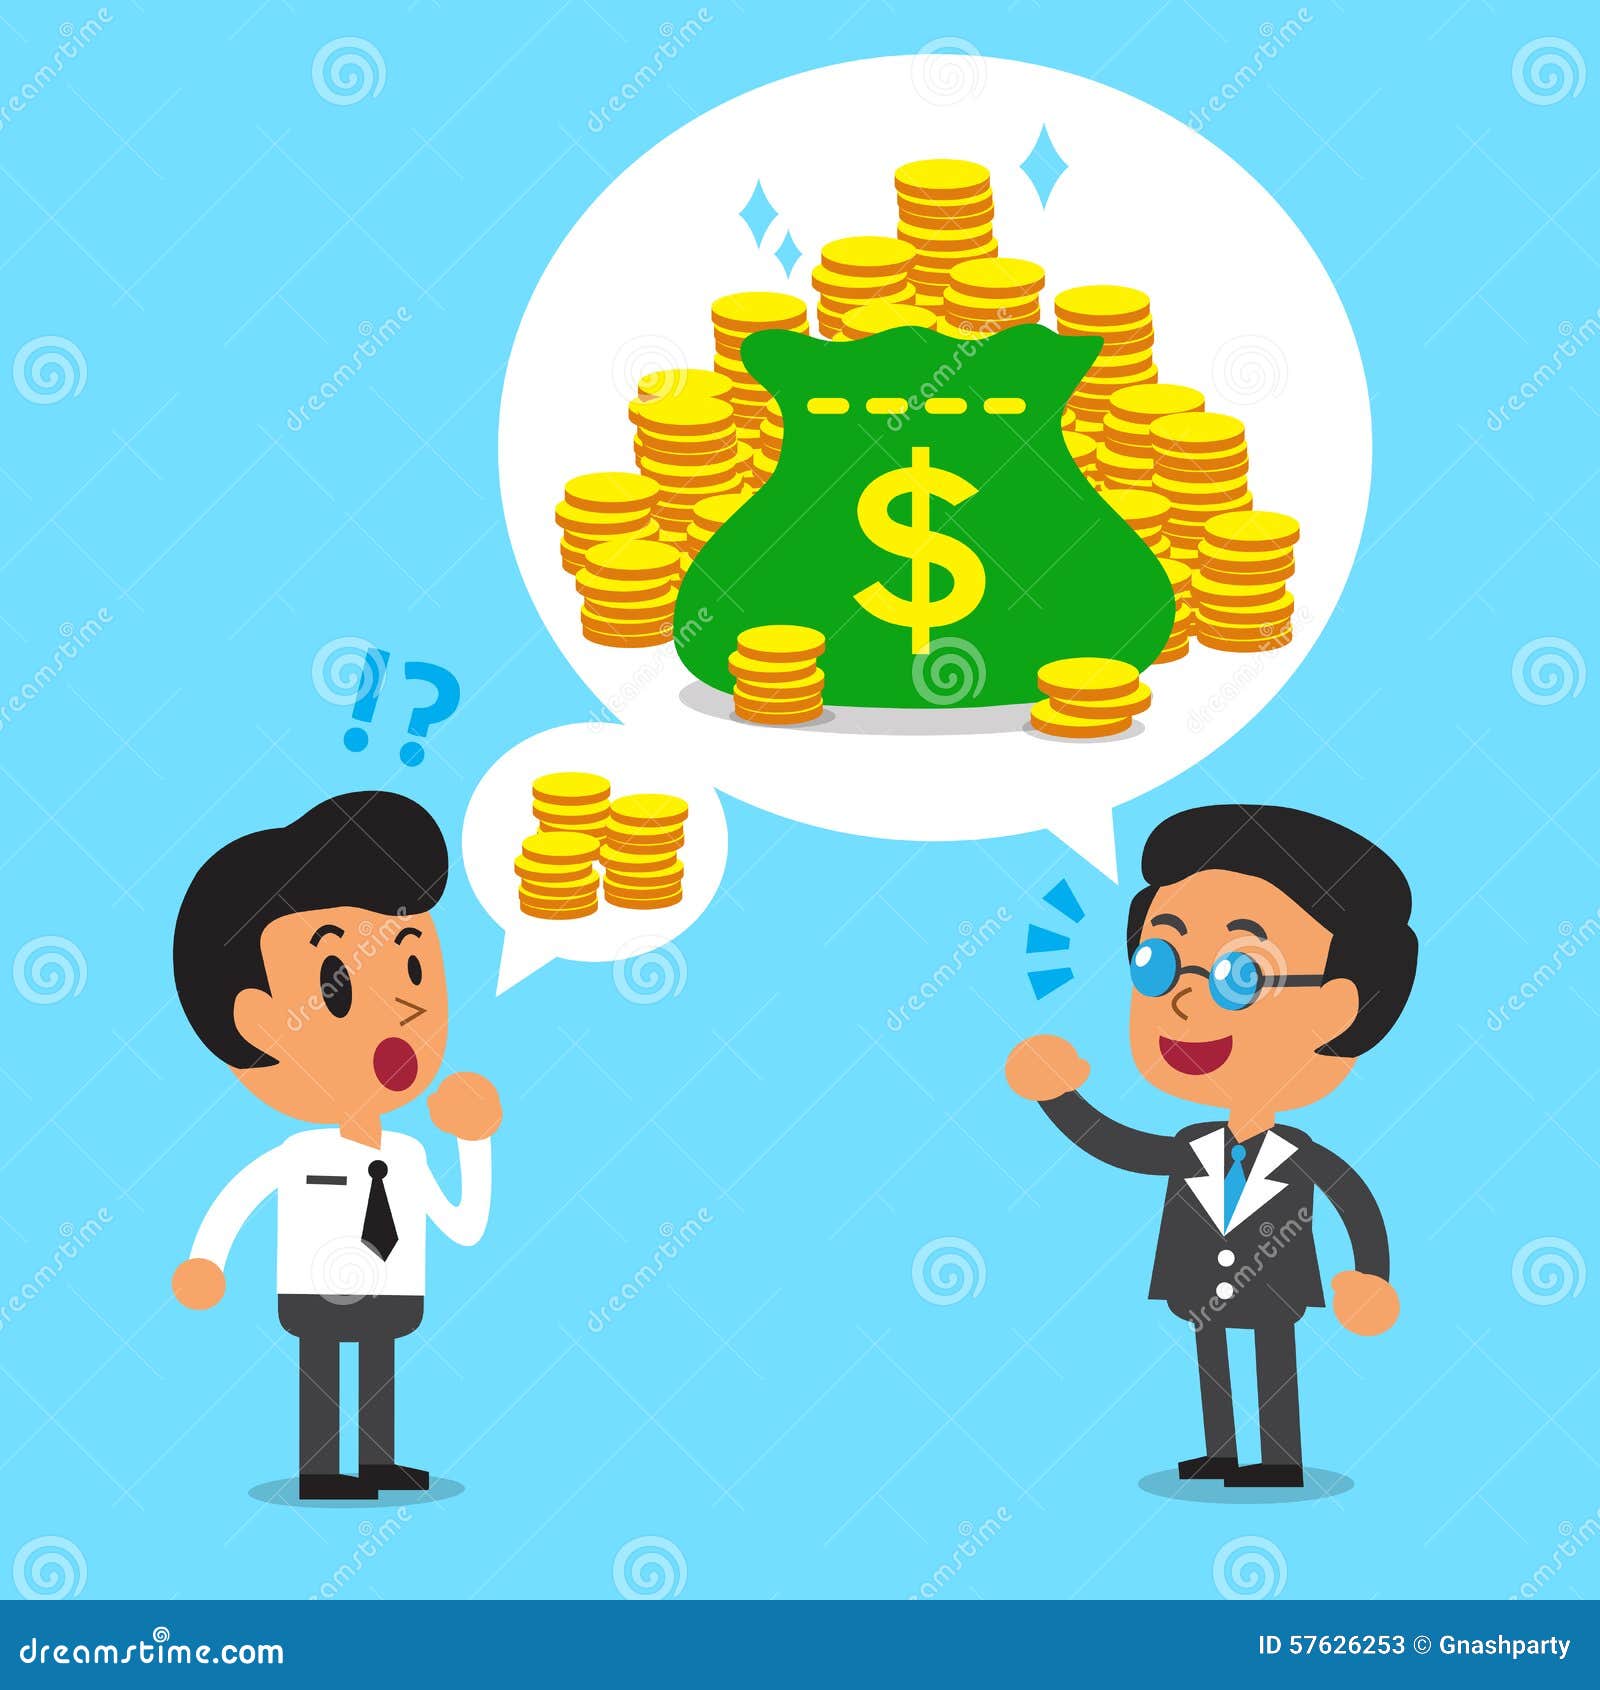 Cartoon Business Boss Talking about More Money Than a Businessman Stock  Vector - Illustration of rich, design: 57626253